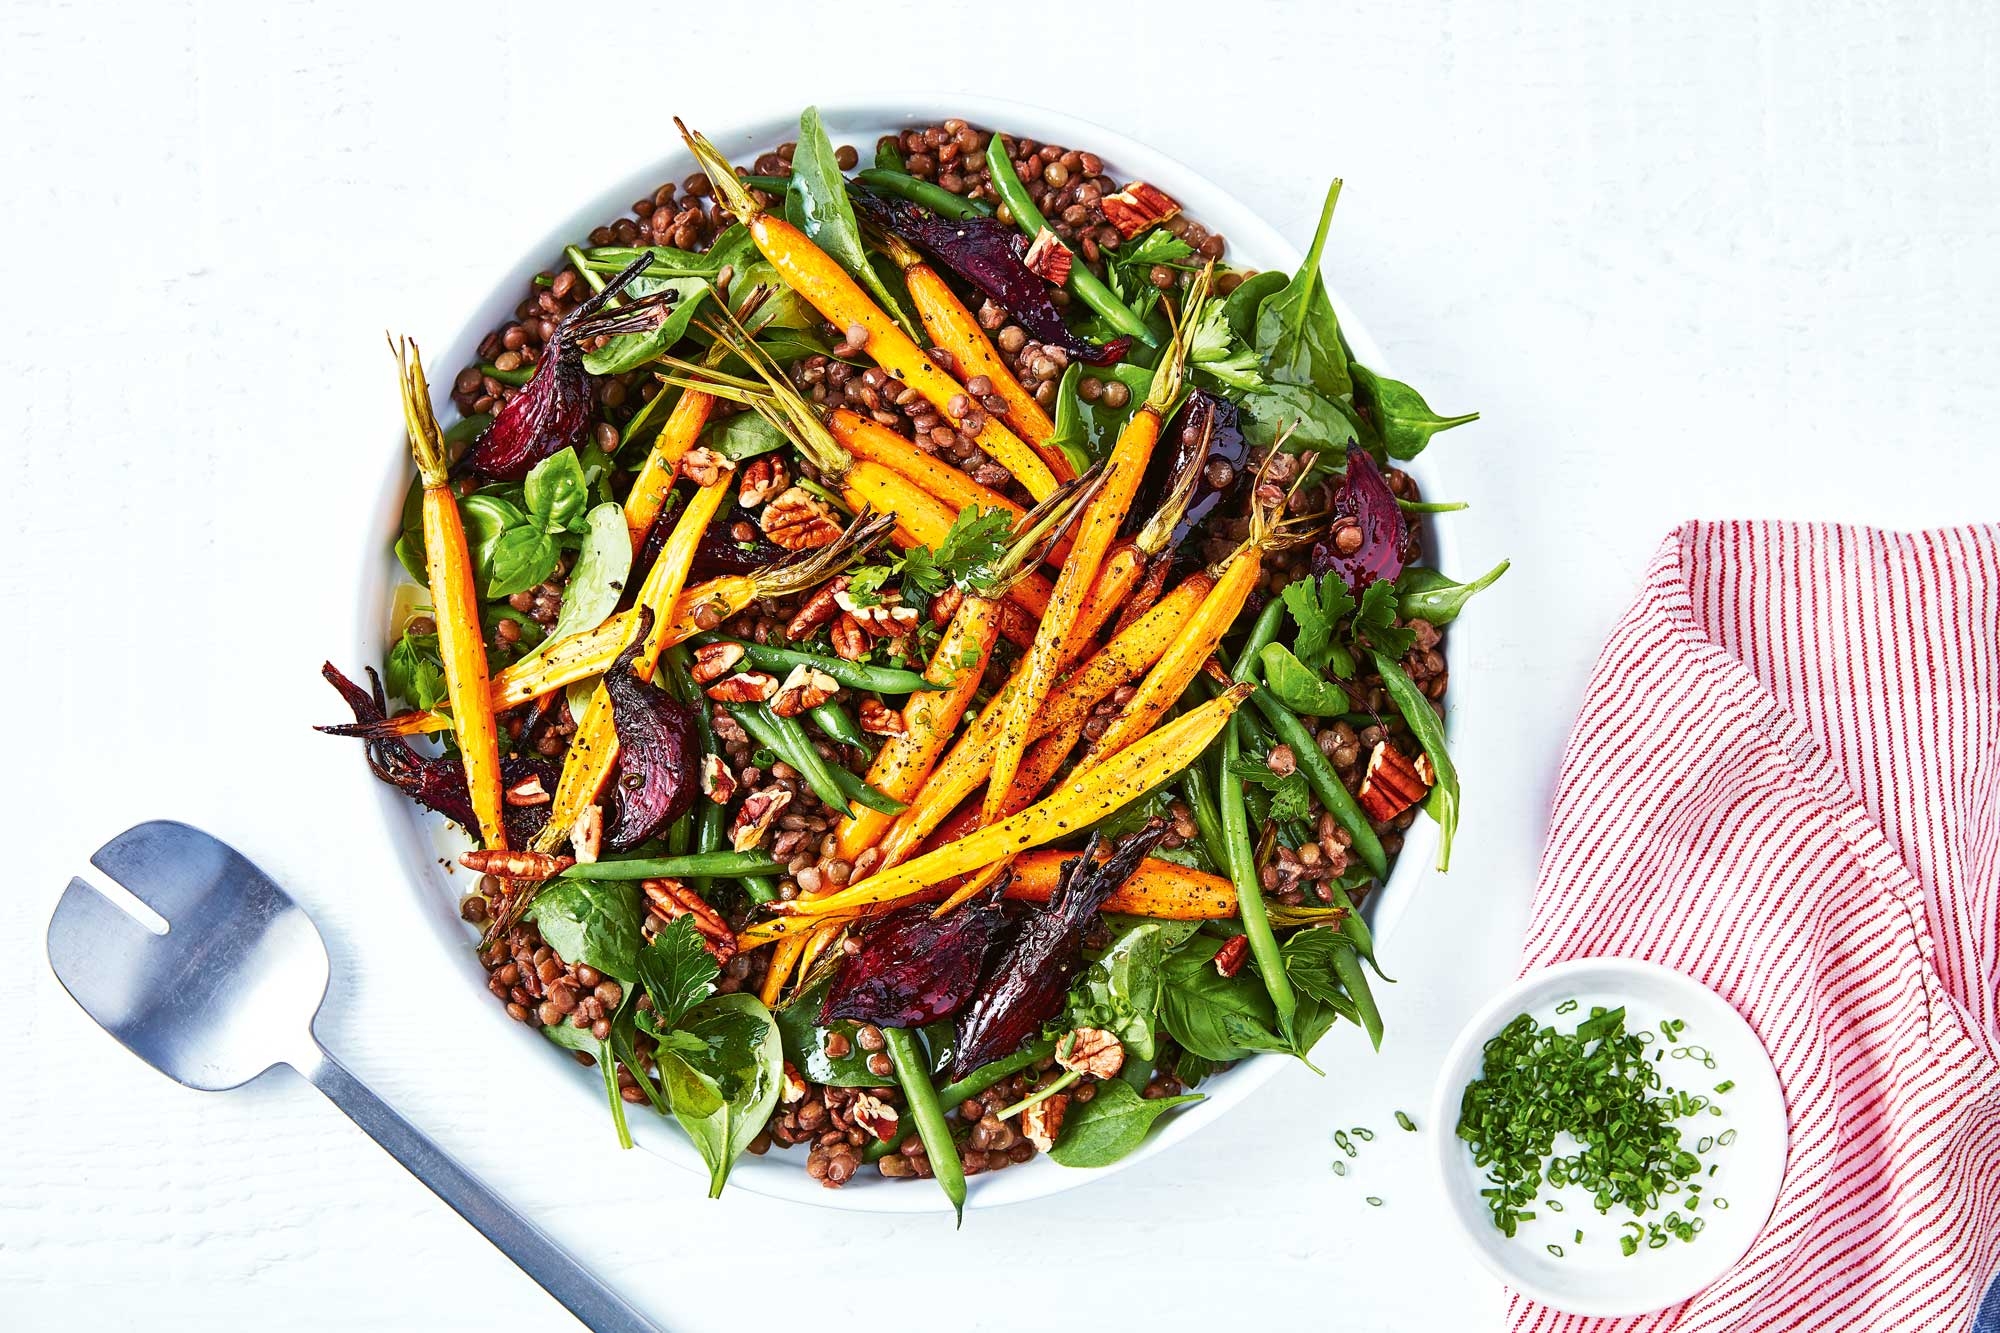 A vibrant salad featuring crisp greens, colourful carrots and beetroot in a visually appealing dish